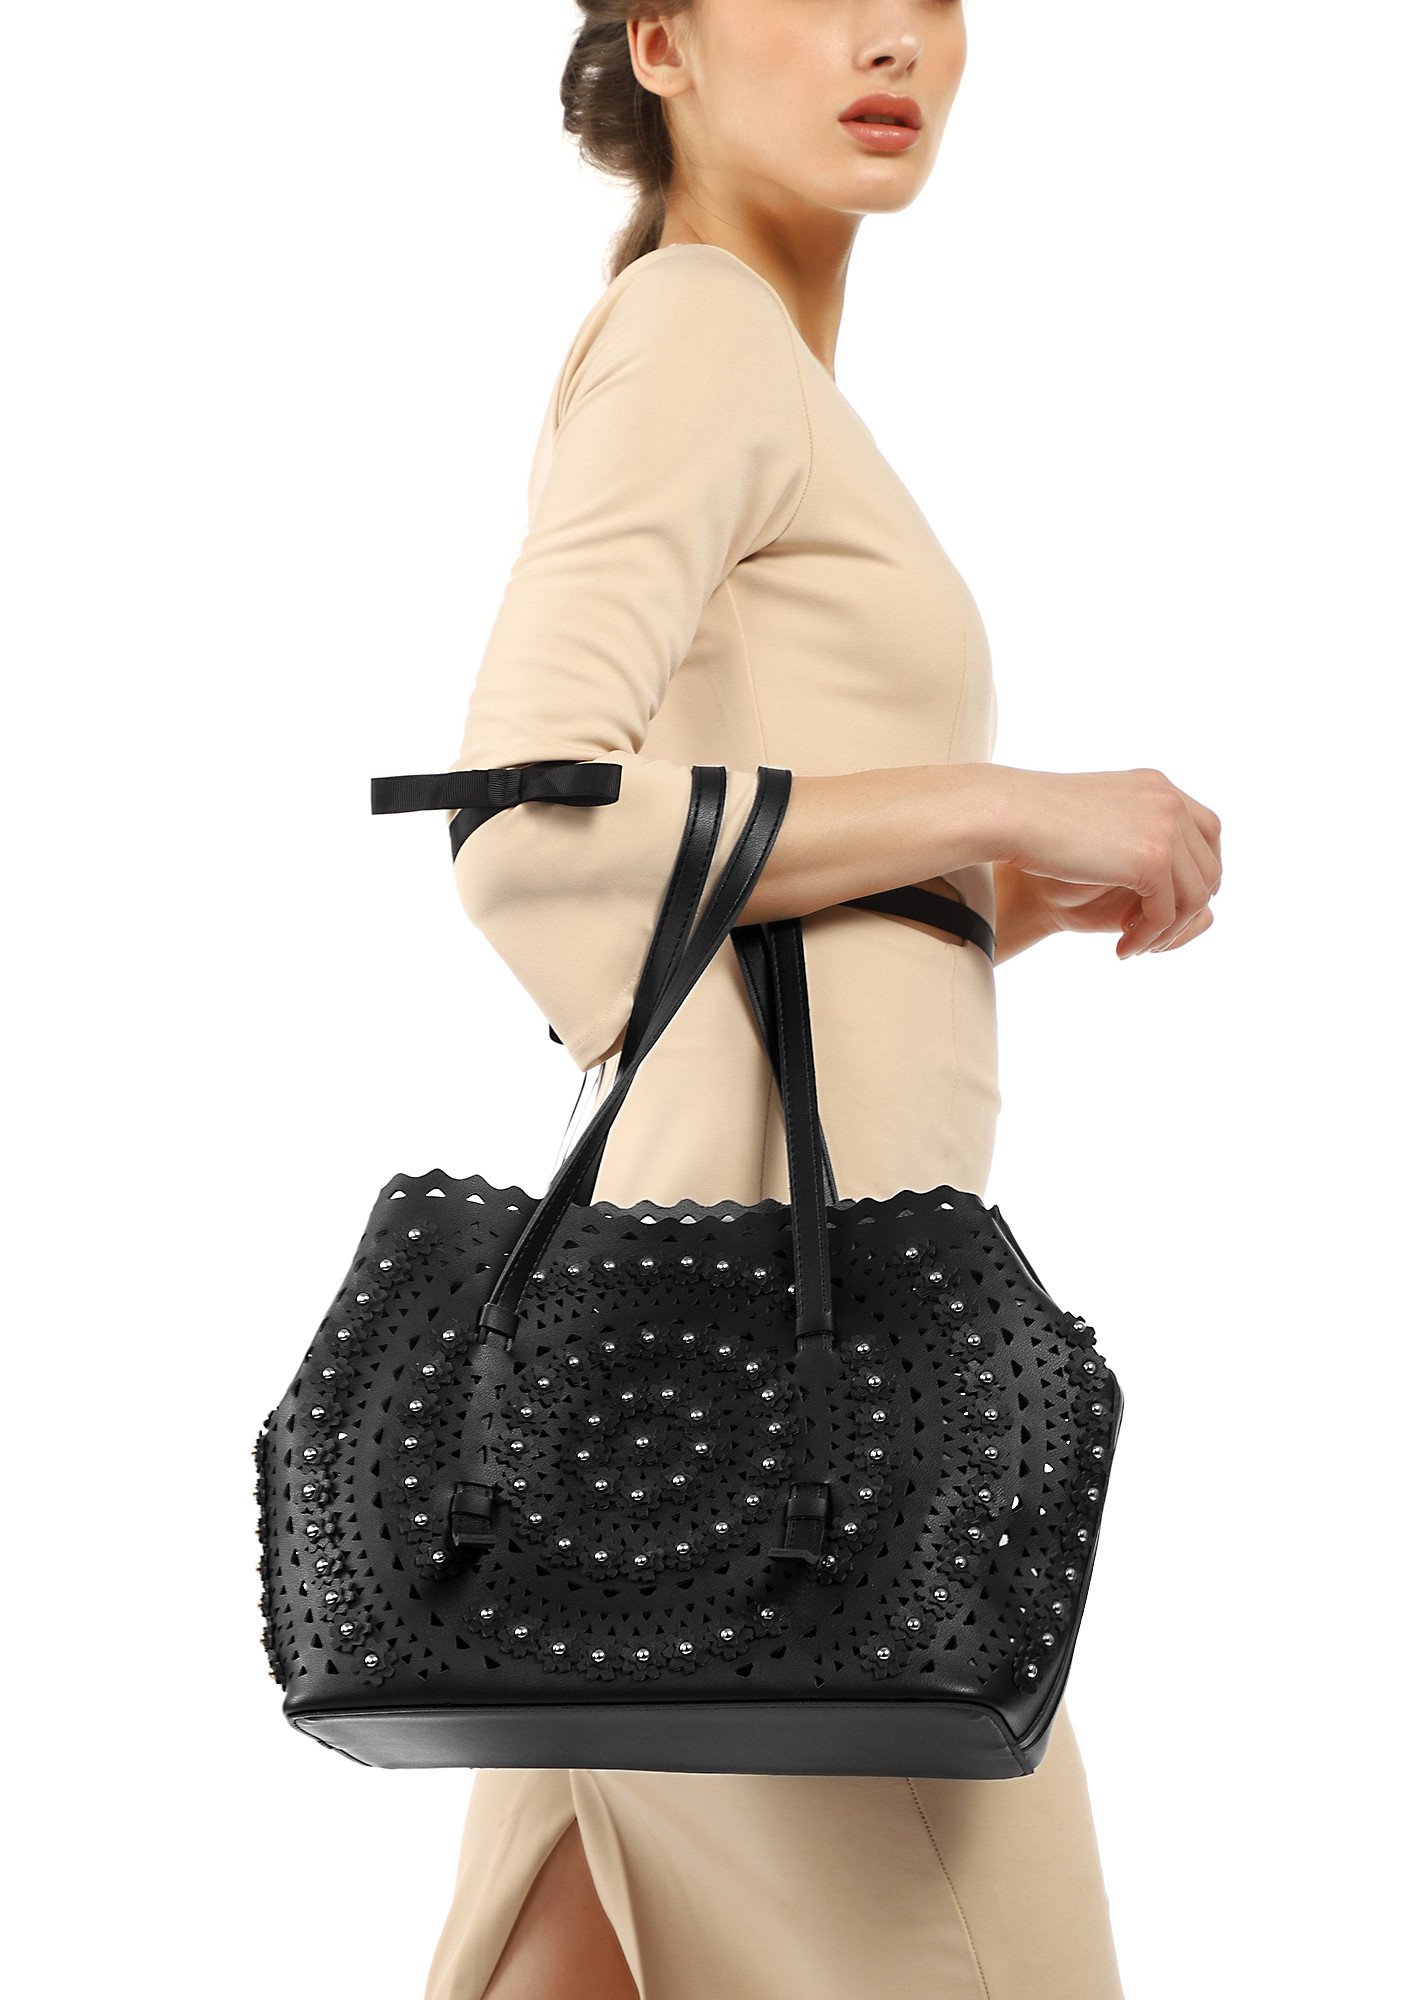 ADORNED WITH PERFECTION BLACK TOTE BAG